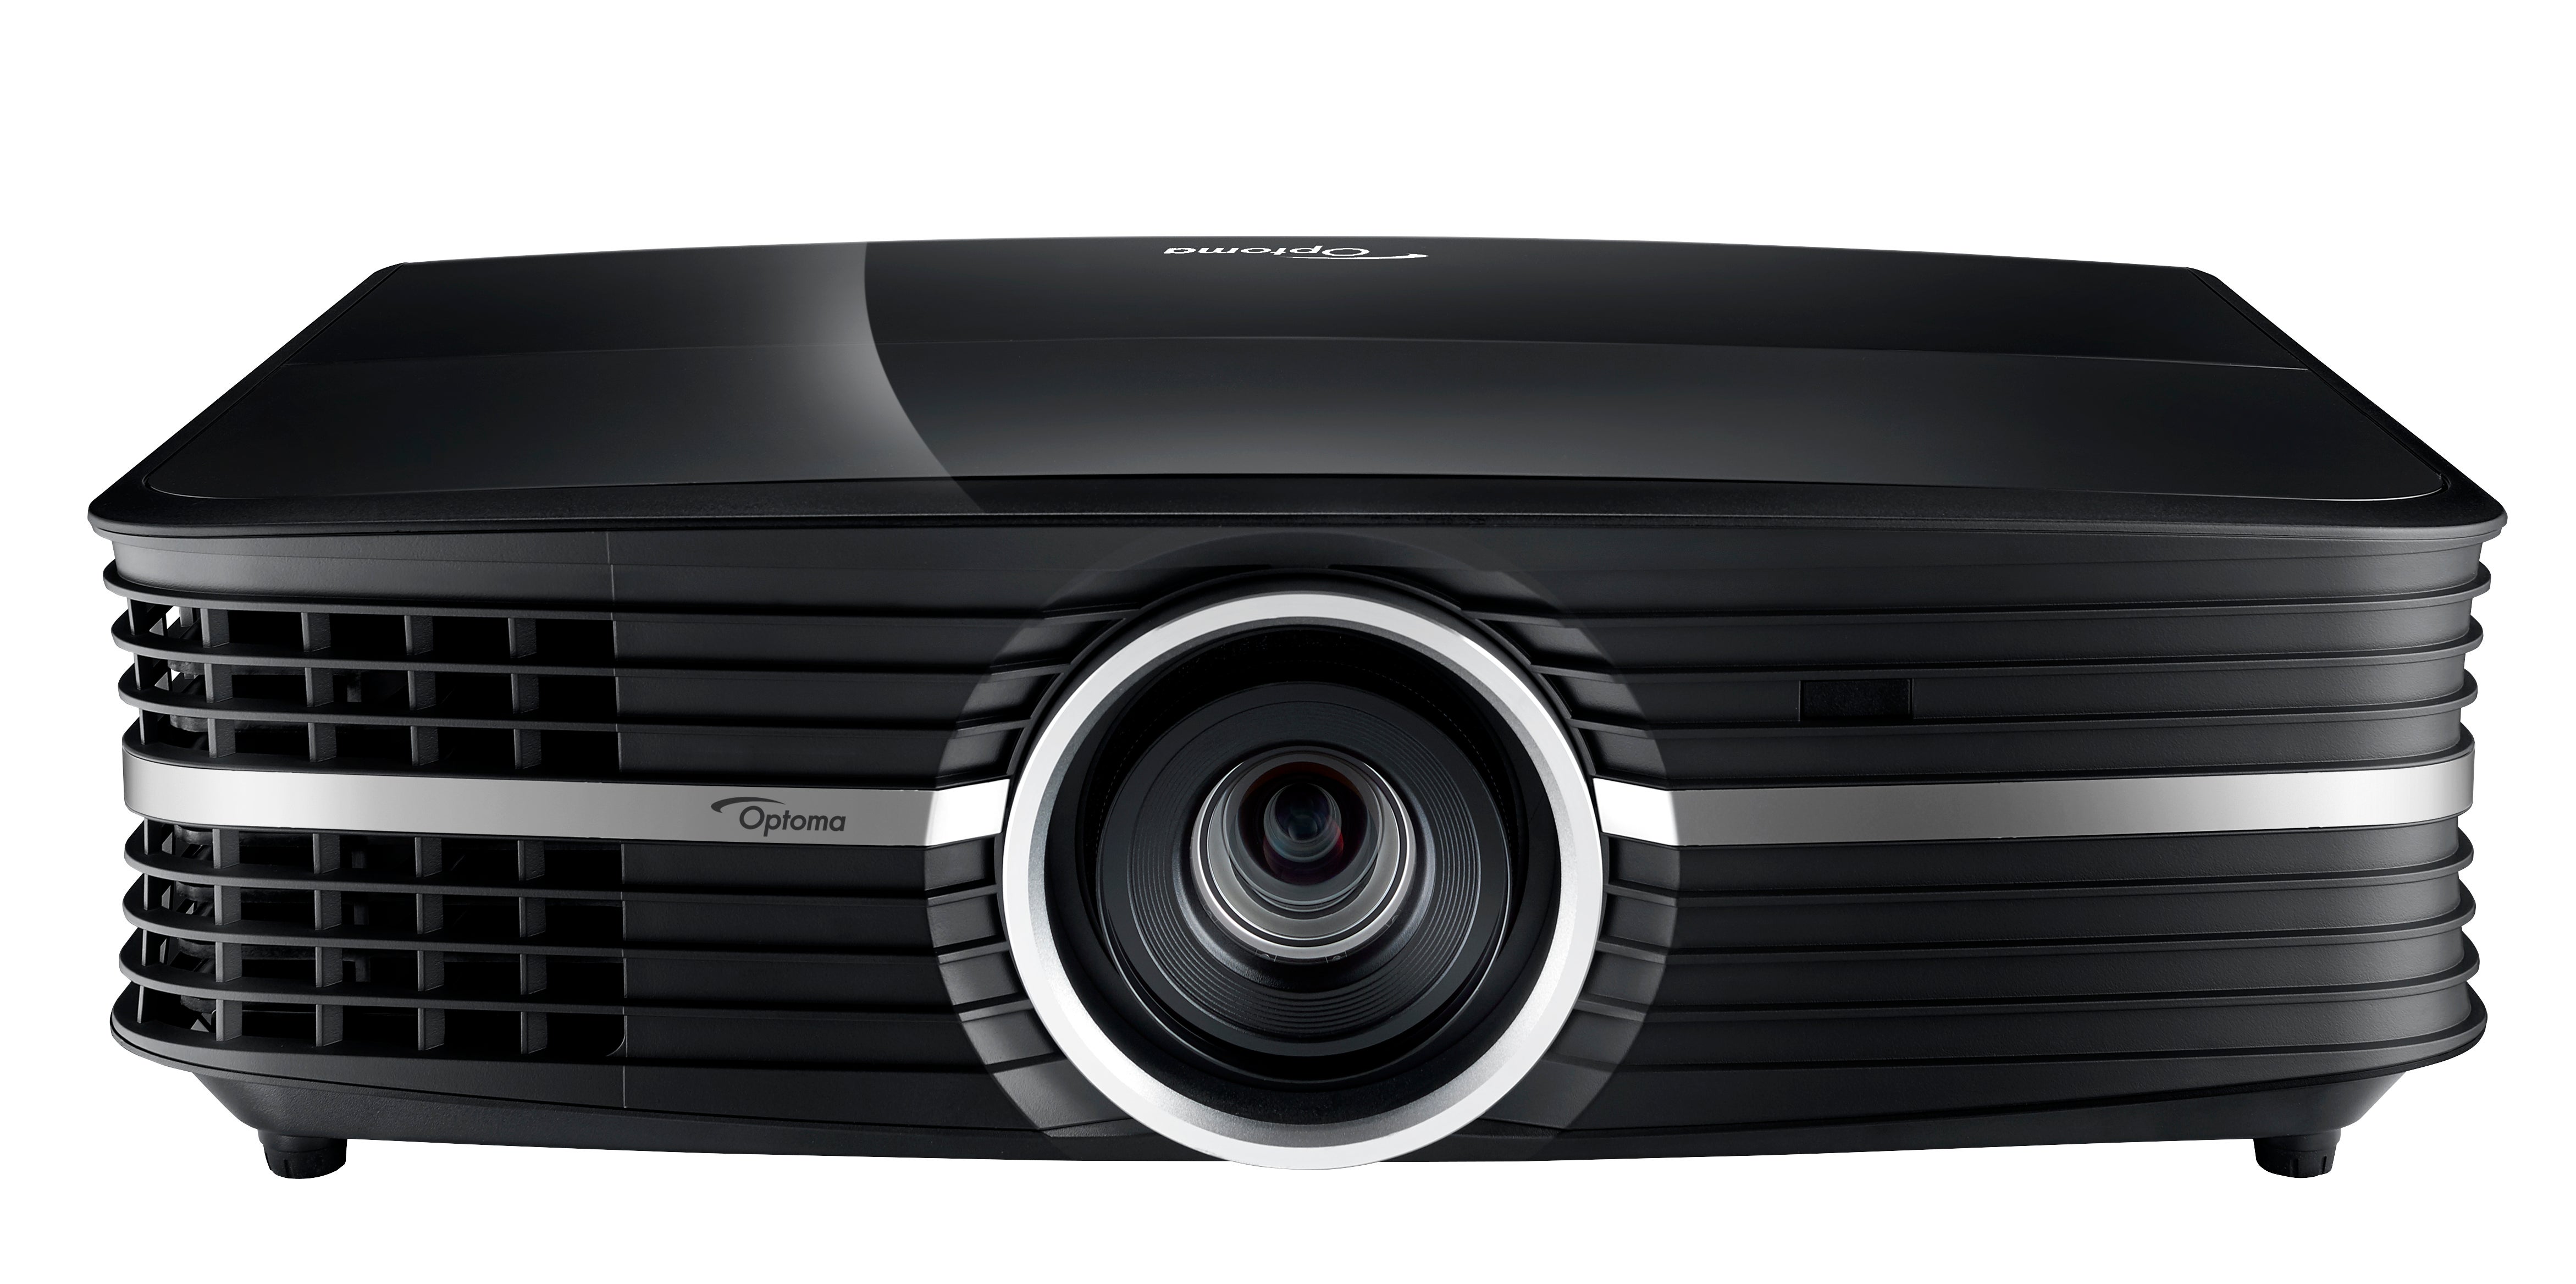 Optoma UHD65 4K projector front view on white background.